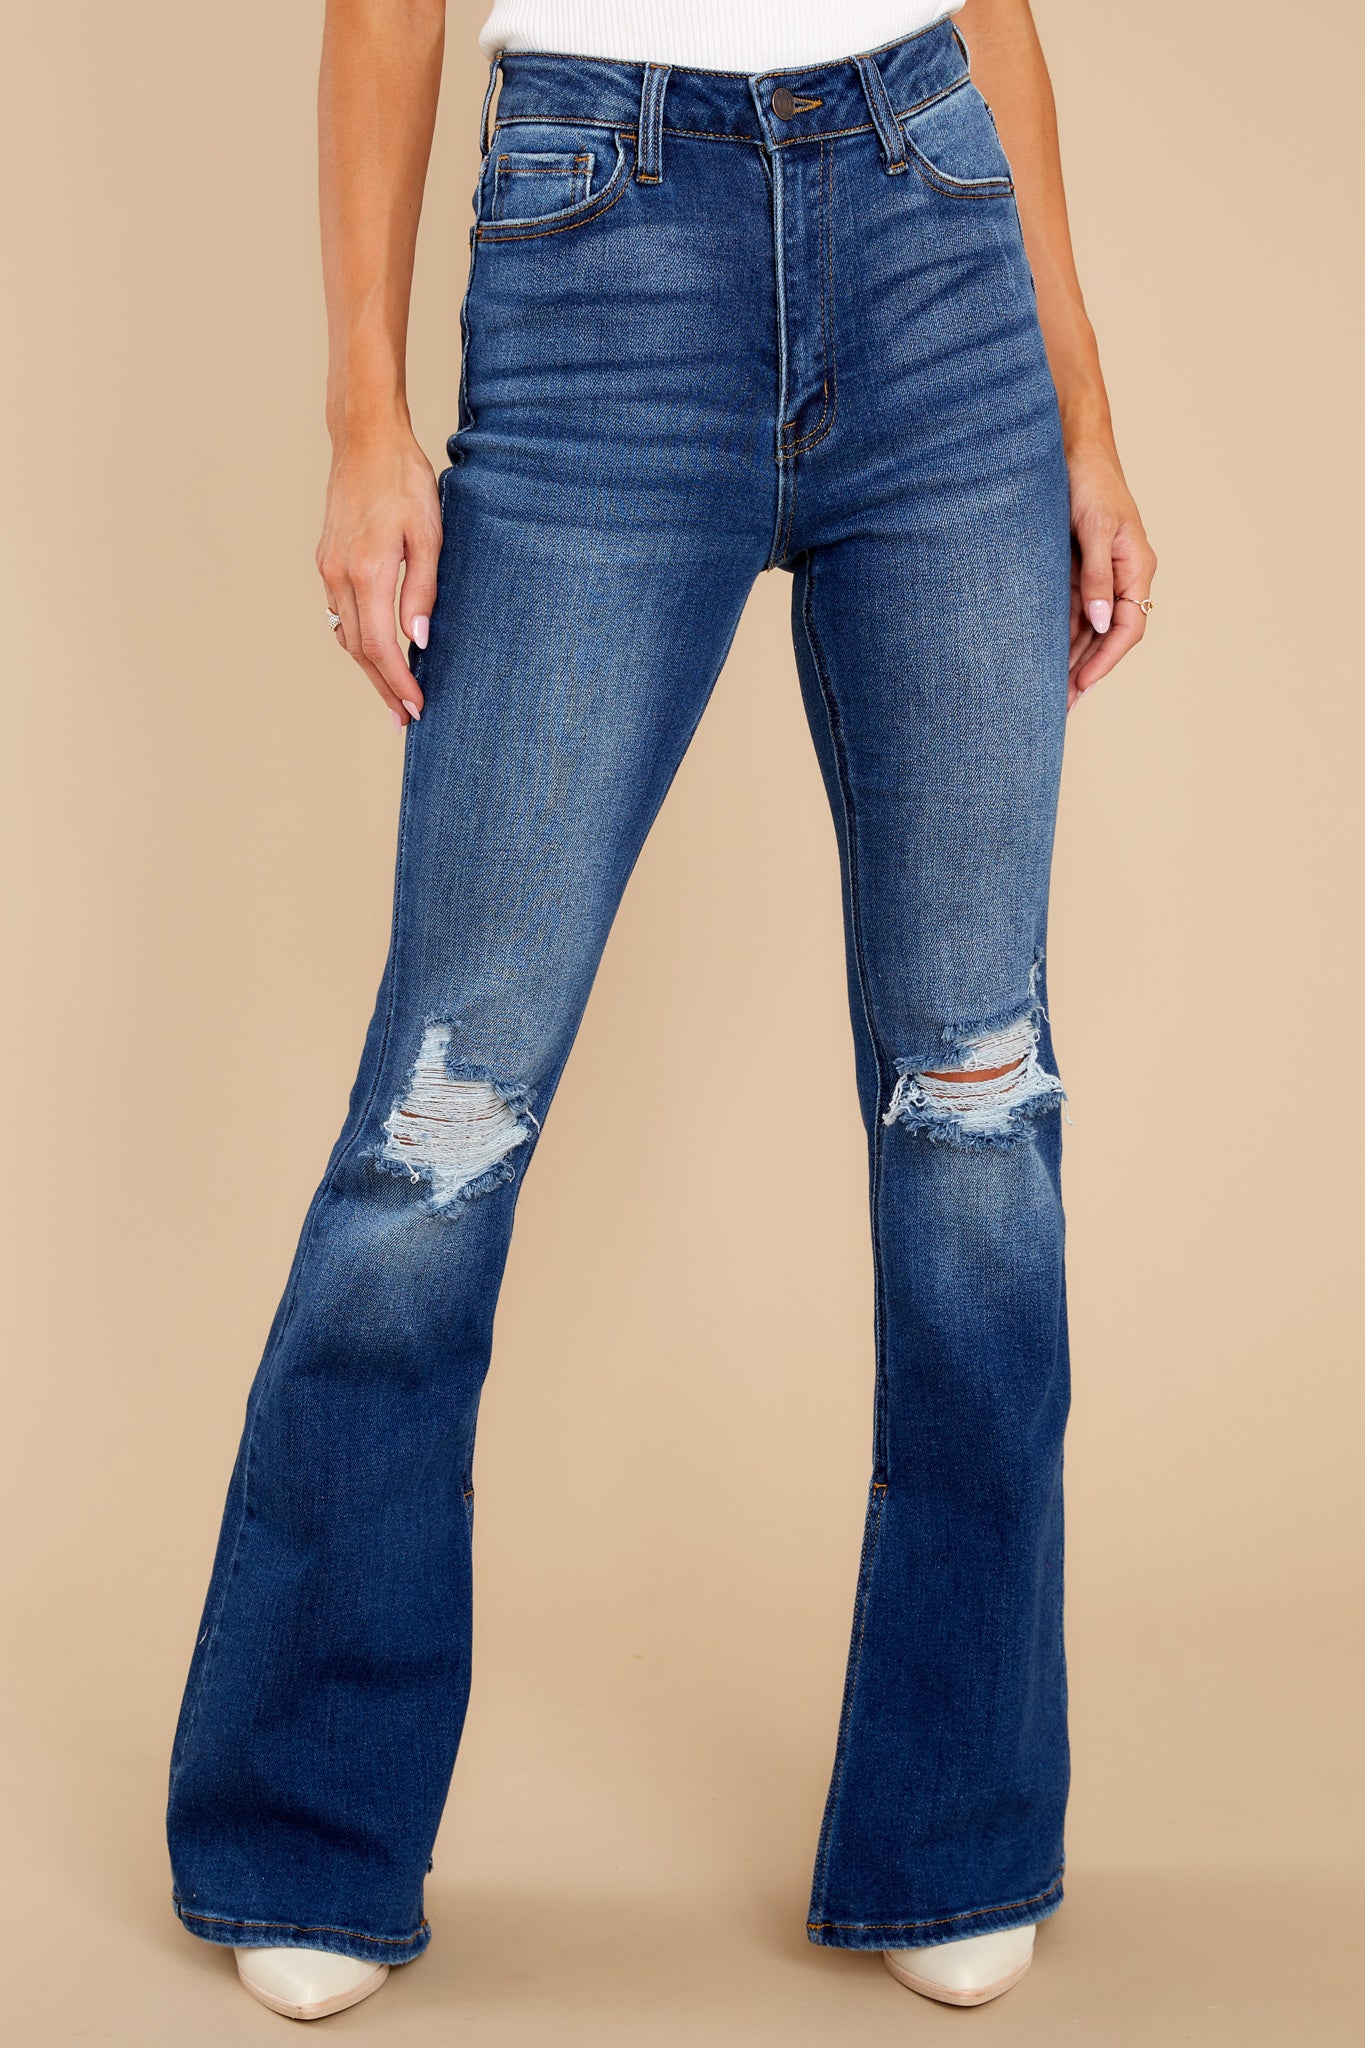 Front view of these jeans that feature light distressing throughout, wide legs, 3 functional front pockets, and a standard zipper and button closure.